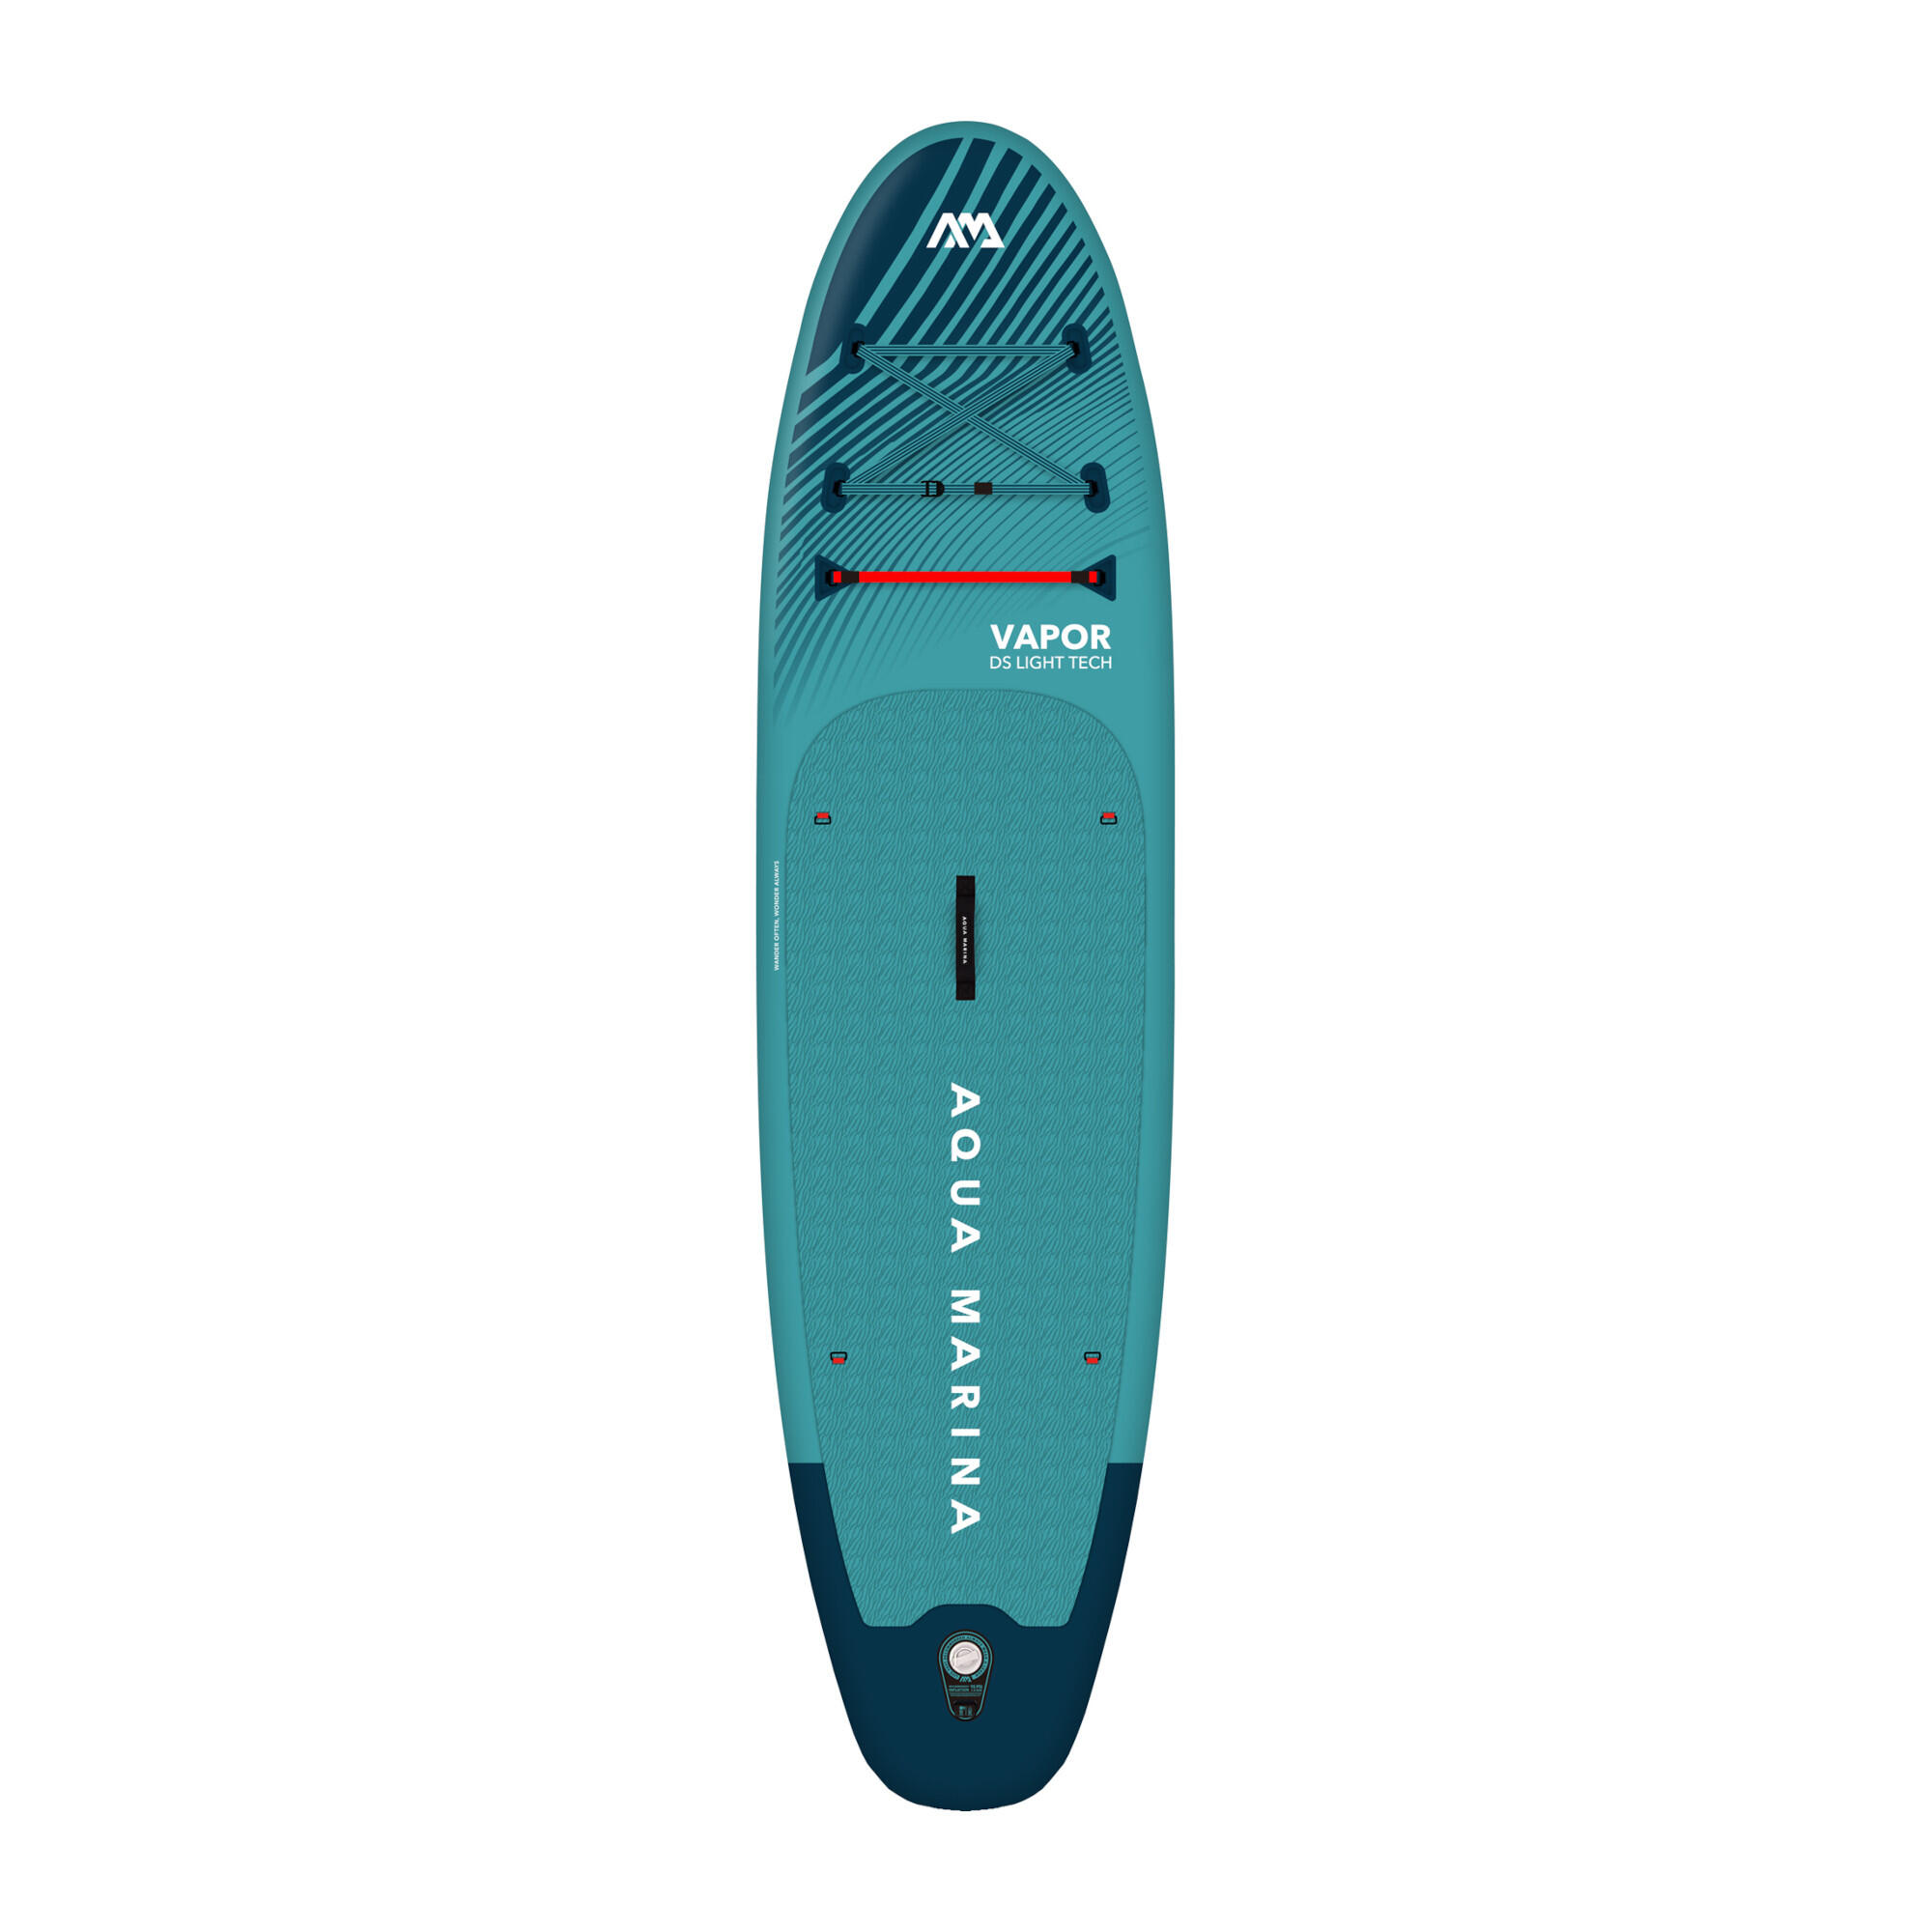 Aqua Marina Vapor stand-up paddle board package 10ft4/315cm 11/15